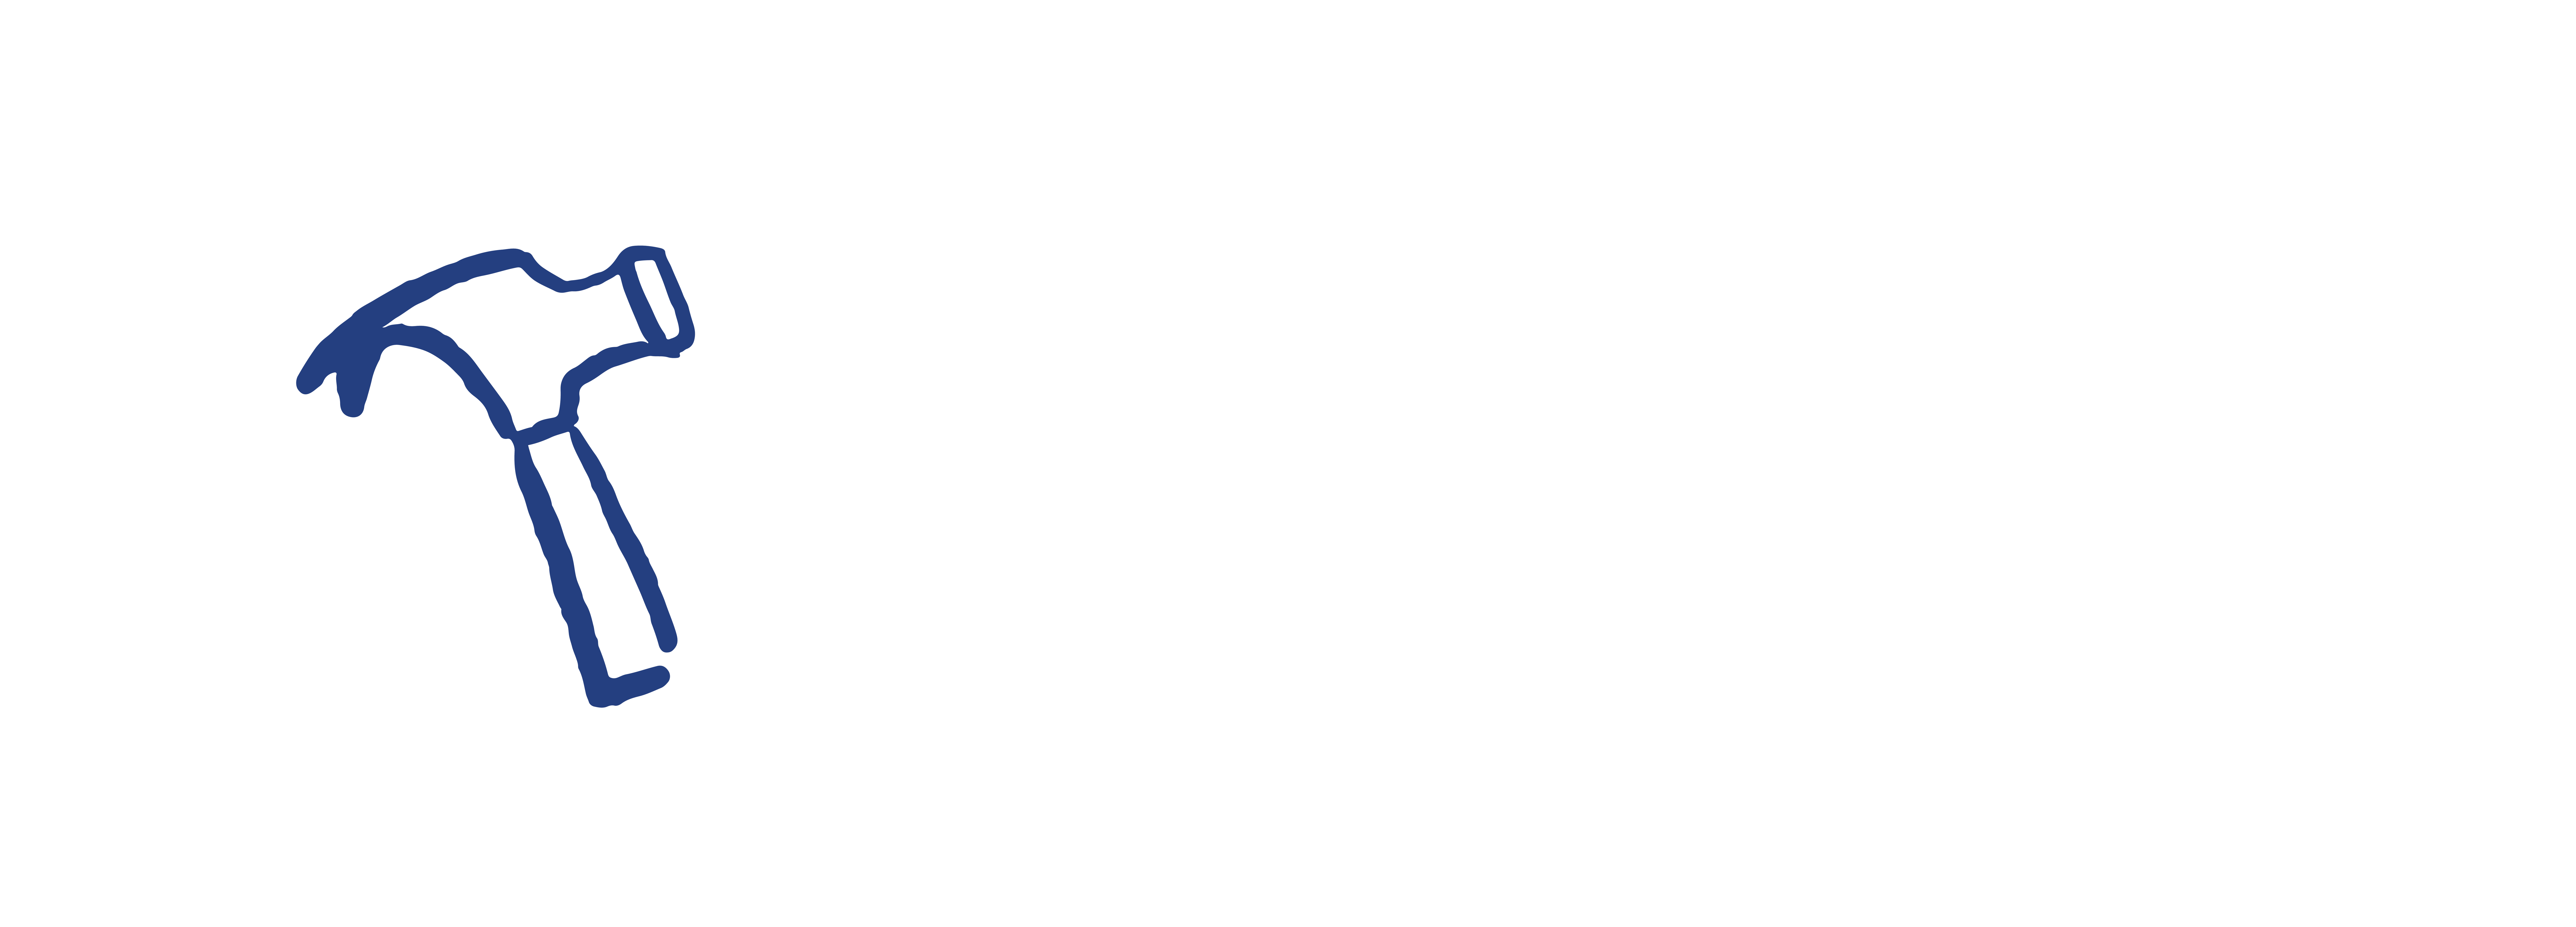 A White version of the Framing the Hammer logo, including a framed, hand-drawn hammer icon in a hand-drawn frame.